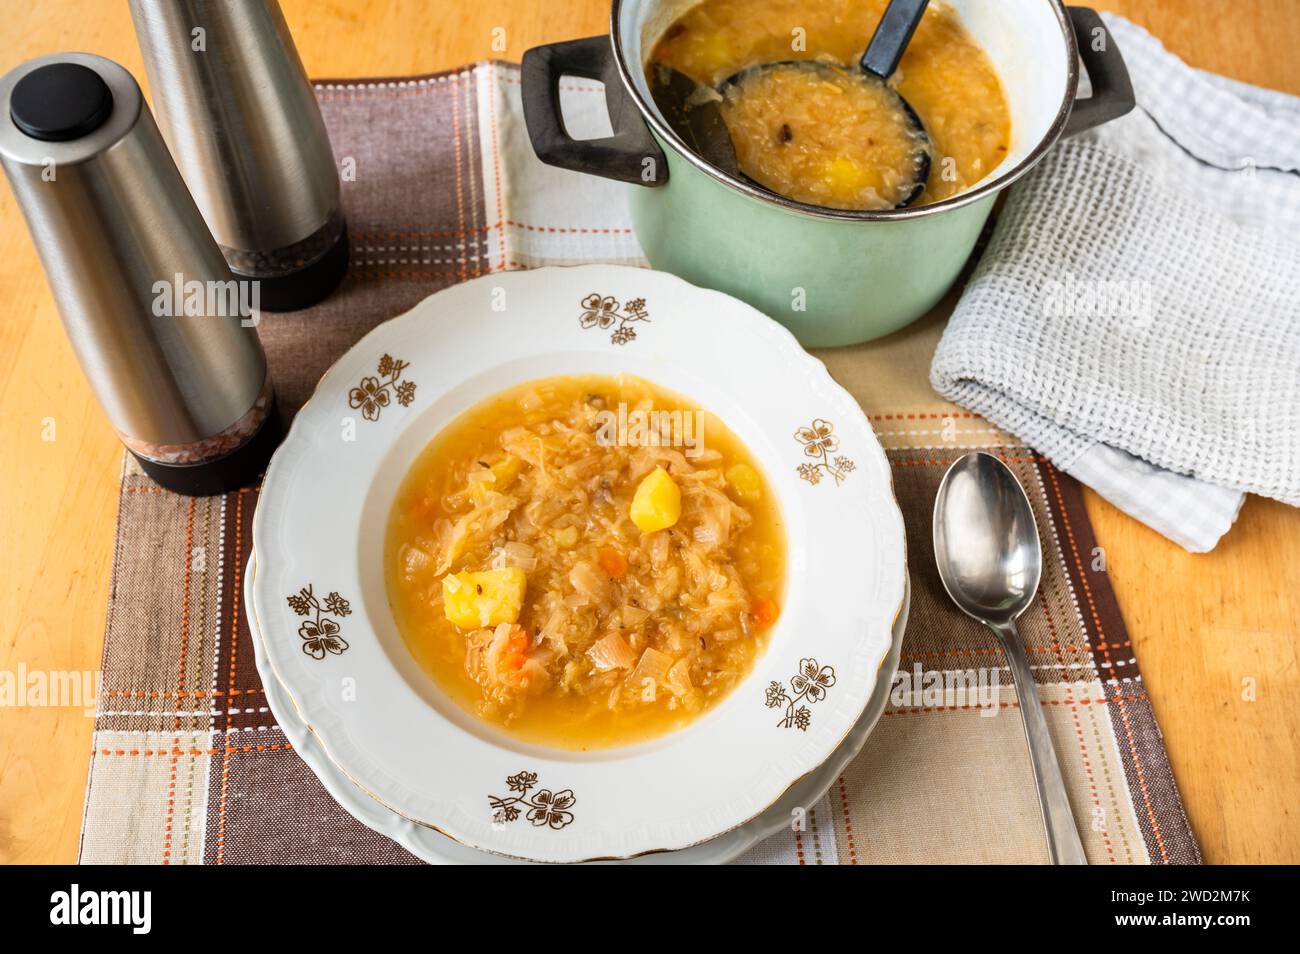 Cabbage soup with potato in decorative plate, pot with soup and ladle, 2 spice rack, towel on table. Stock Photo